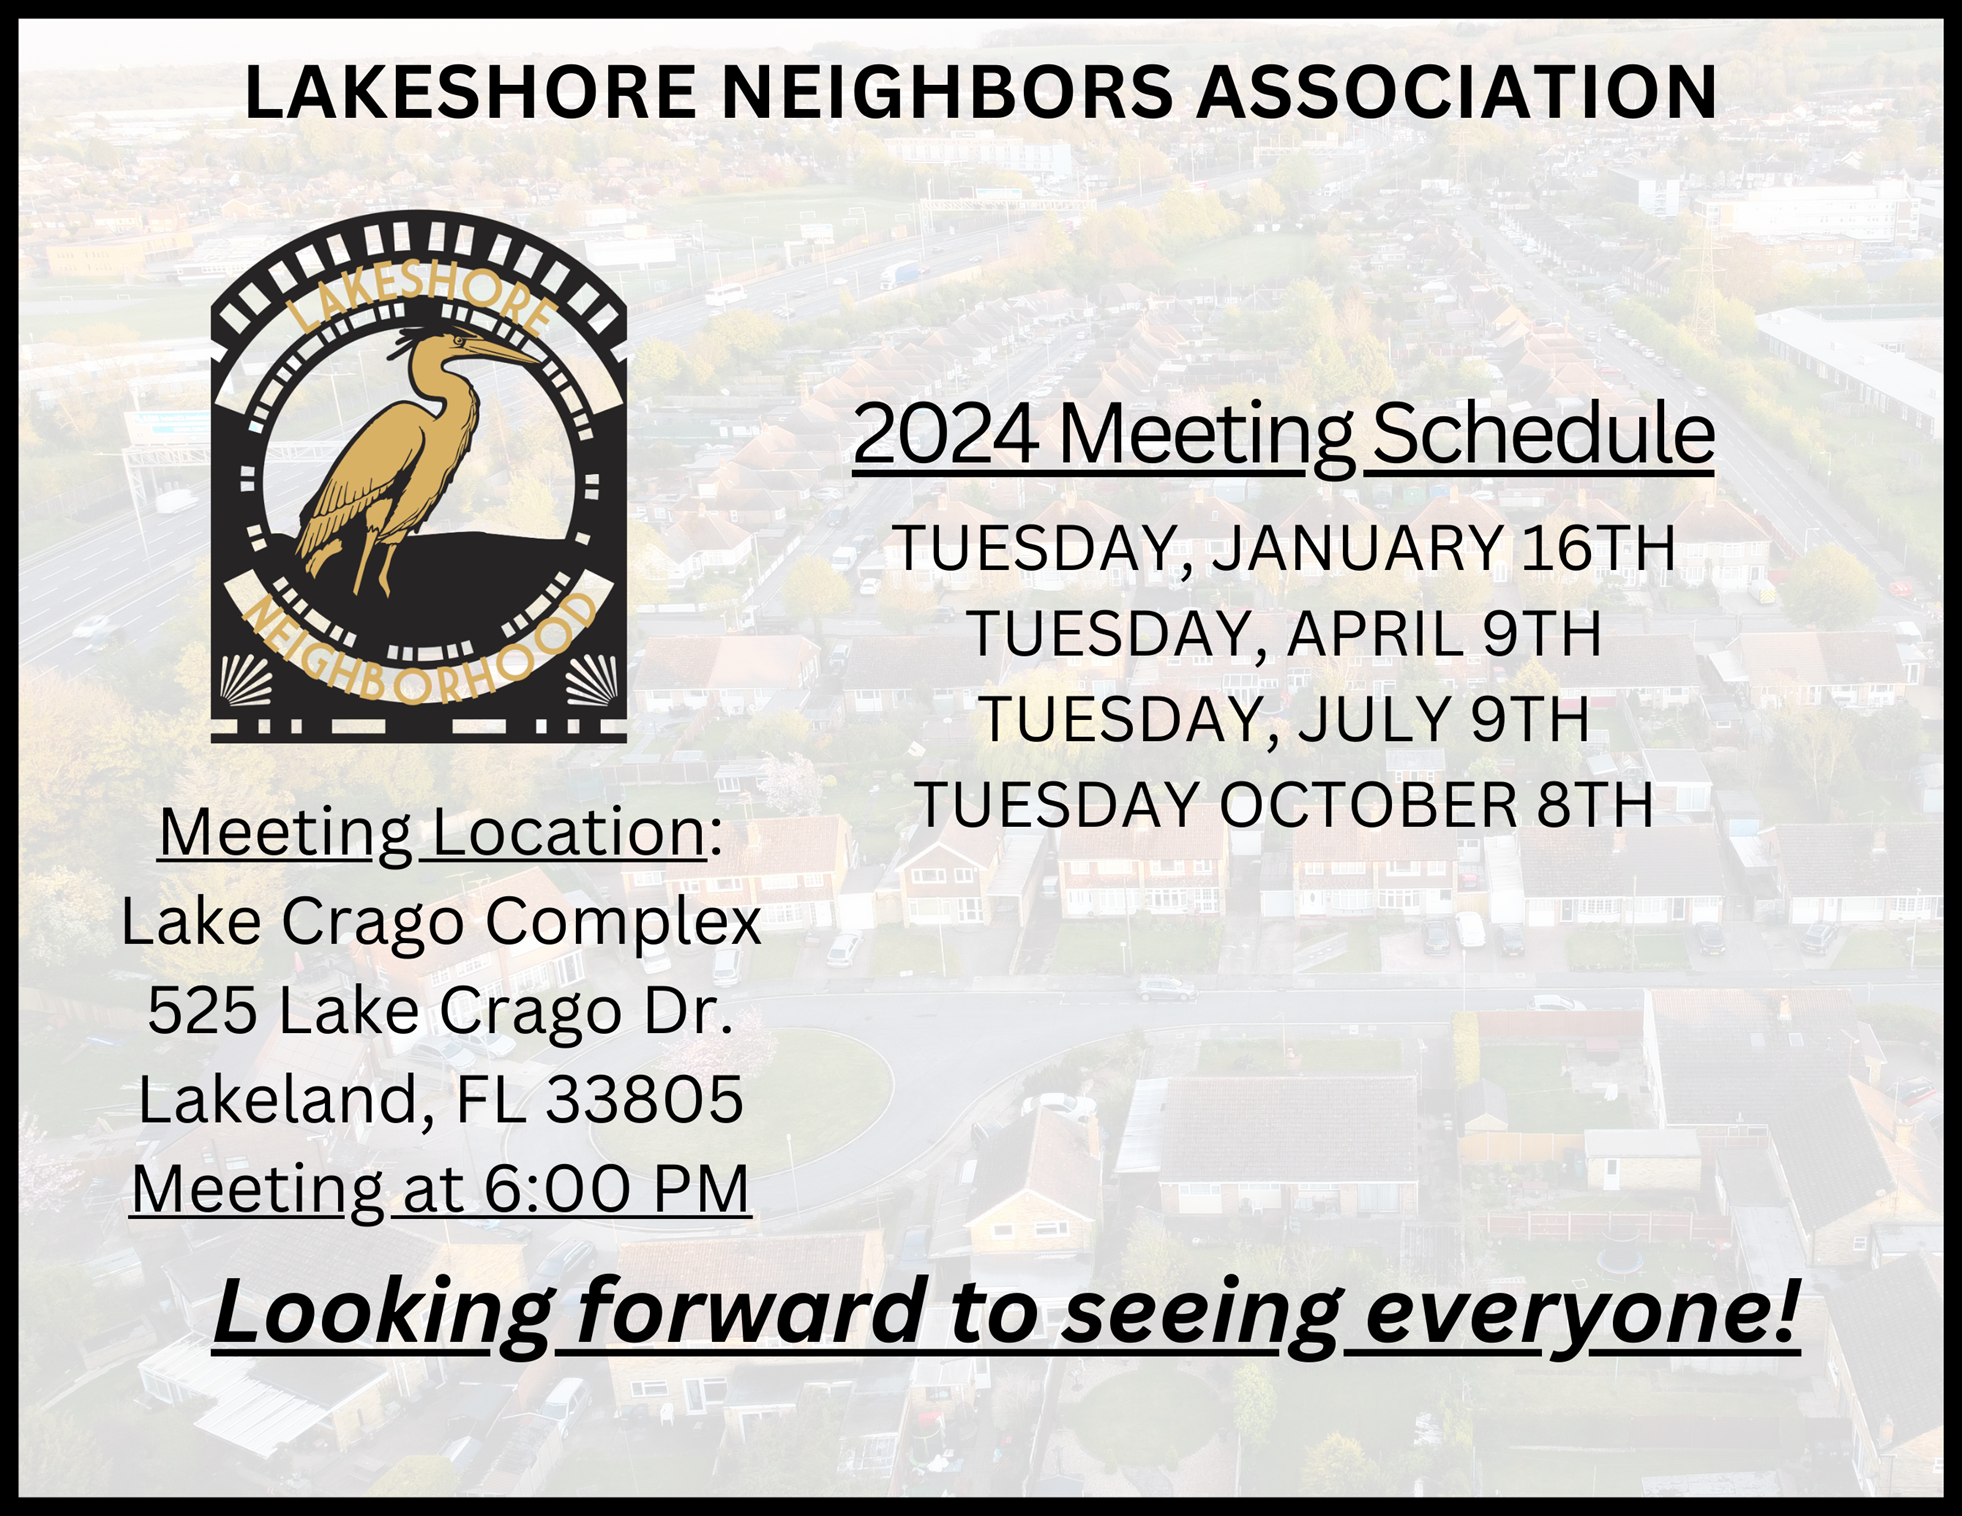 An image of a postcard containing 2024's meeting schedule. January 16th, April 9th, July 9th, and October 8th at 6:00 pm at Lake Crago Complex 525 Lake Crago Dr. Lakeland, FL 33805.